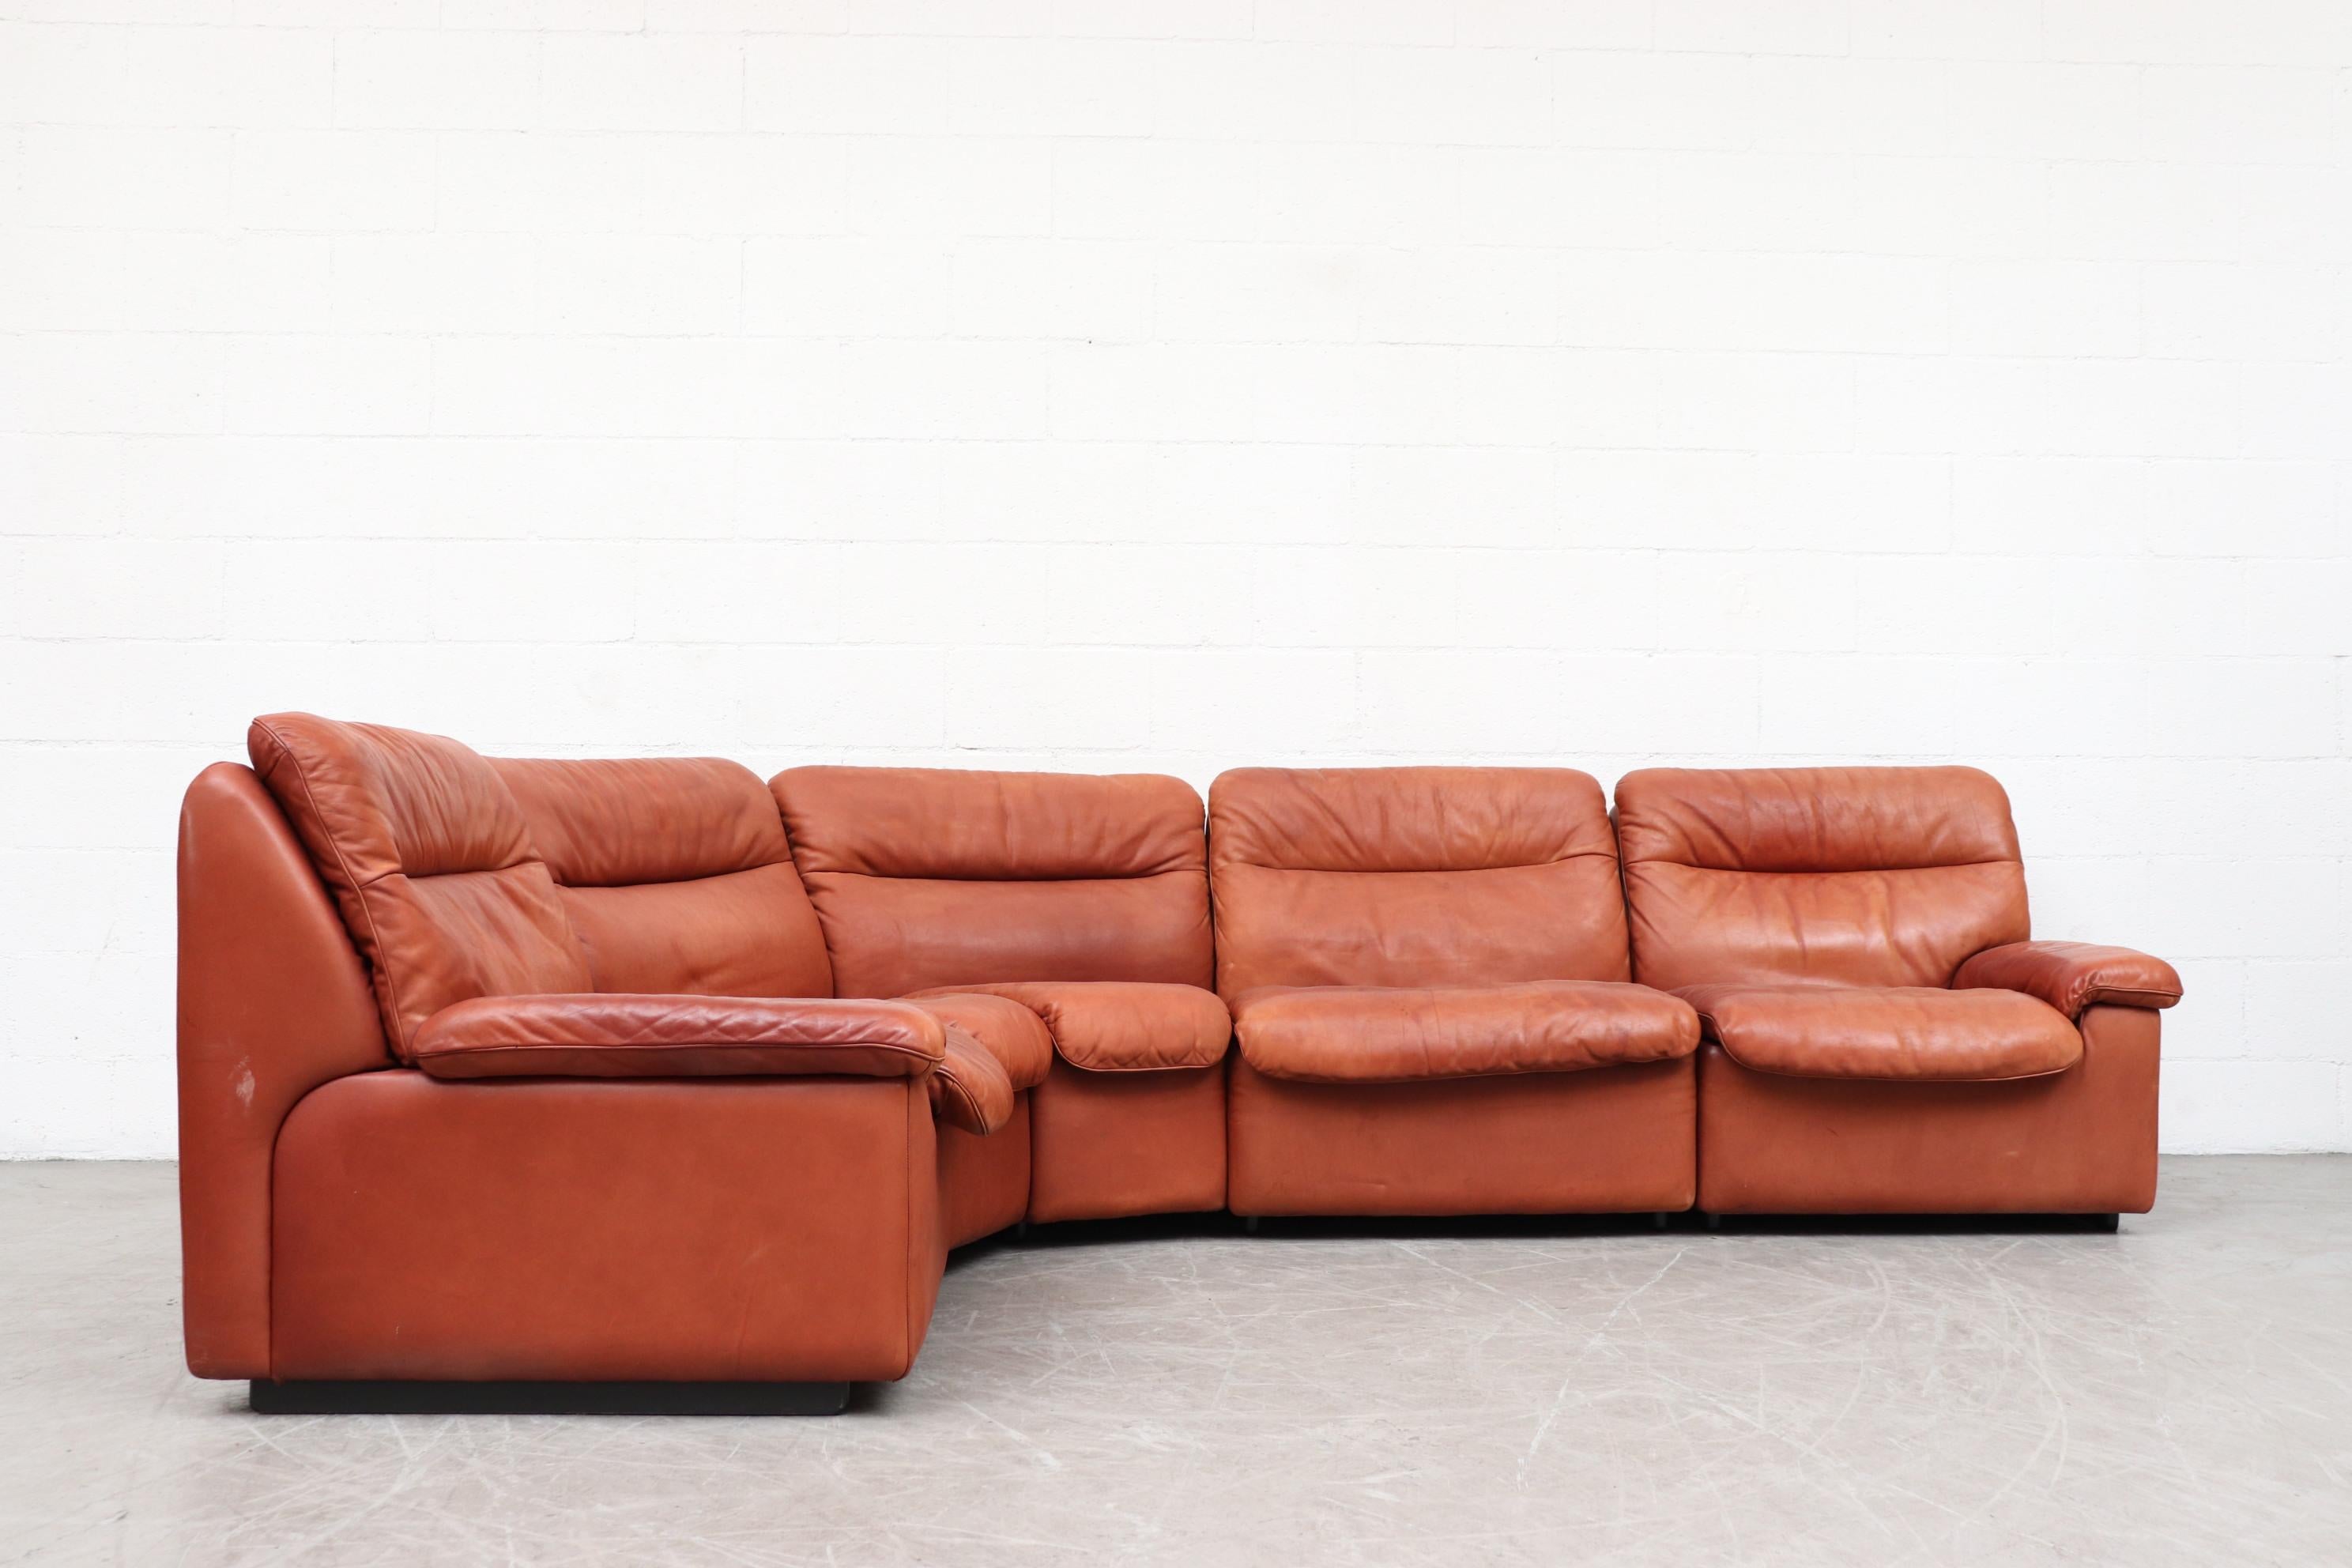 Handsome De Sede 5-piece cognac leather sectional sofa. Beautiful patina, thick leather. In original condition with visible wear. Minimal stains and two small tears on a cushion back as well as a very worn back corner spot (pictured). All signs of